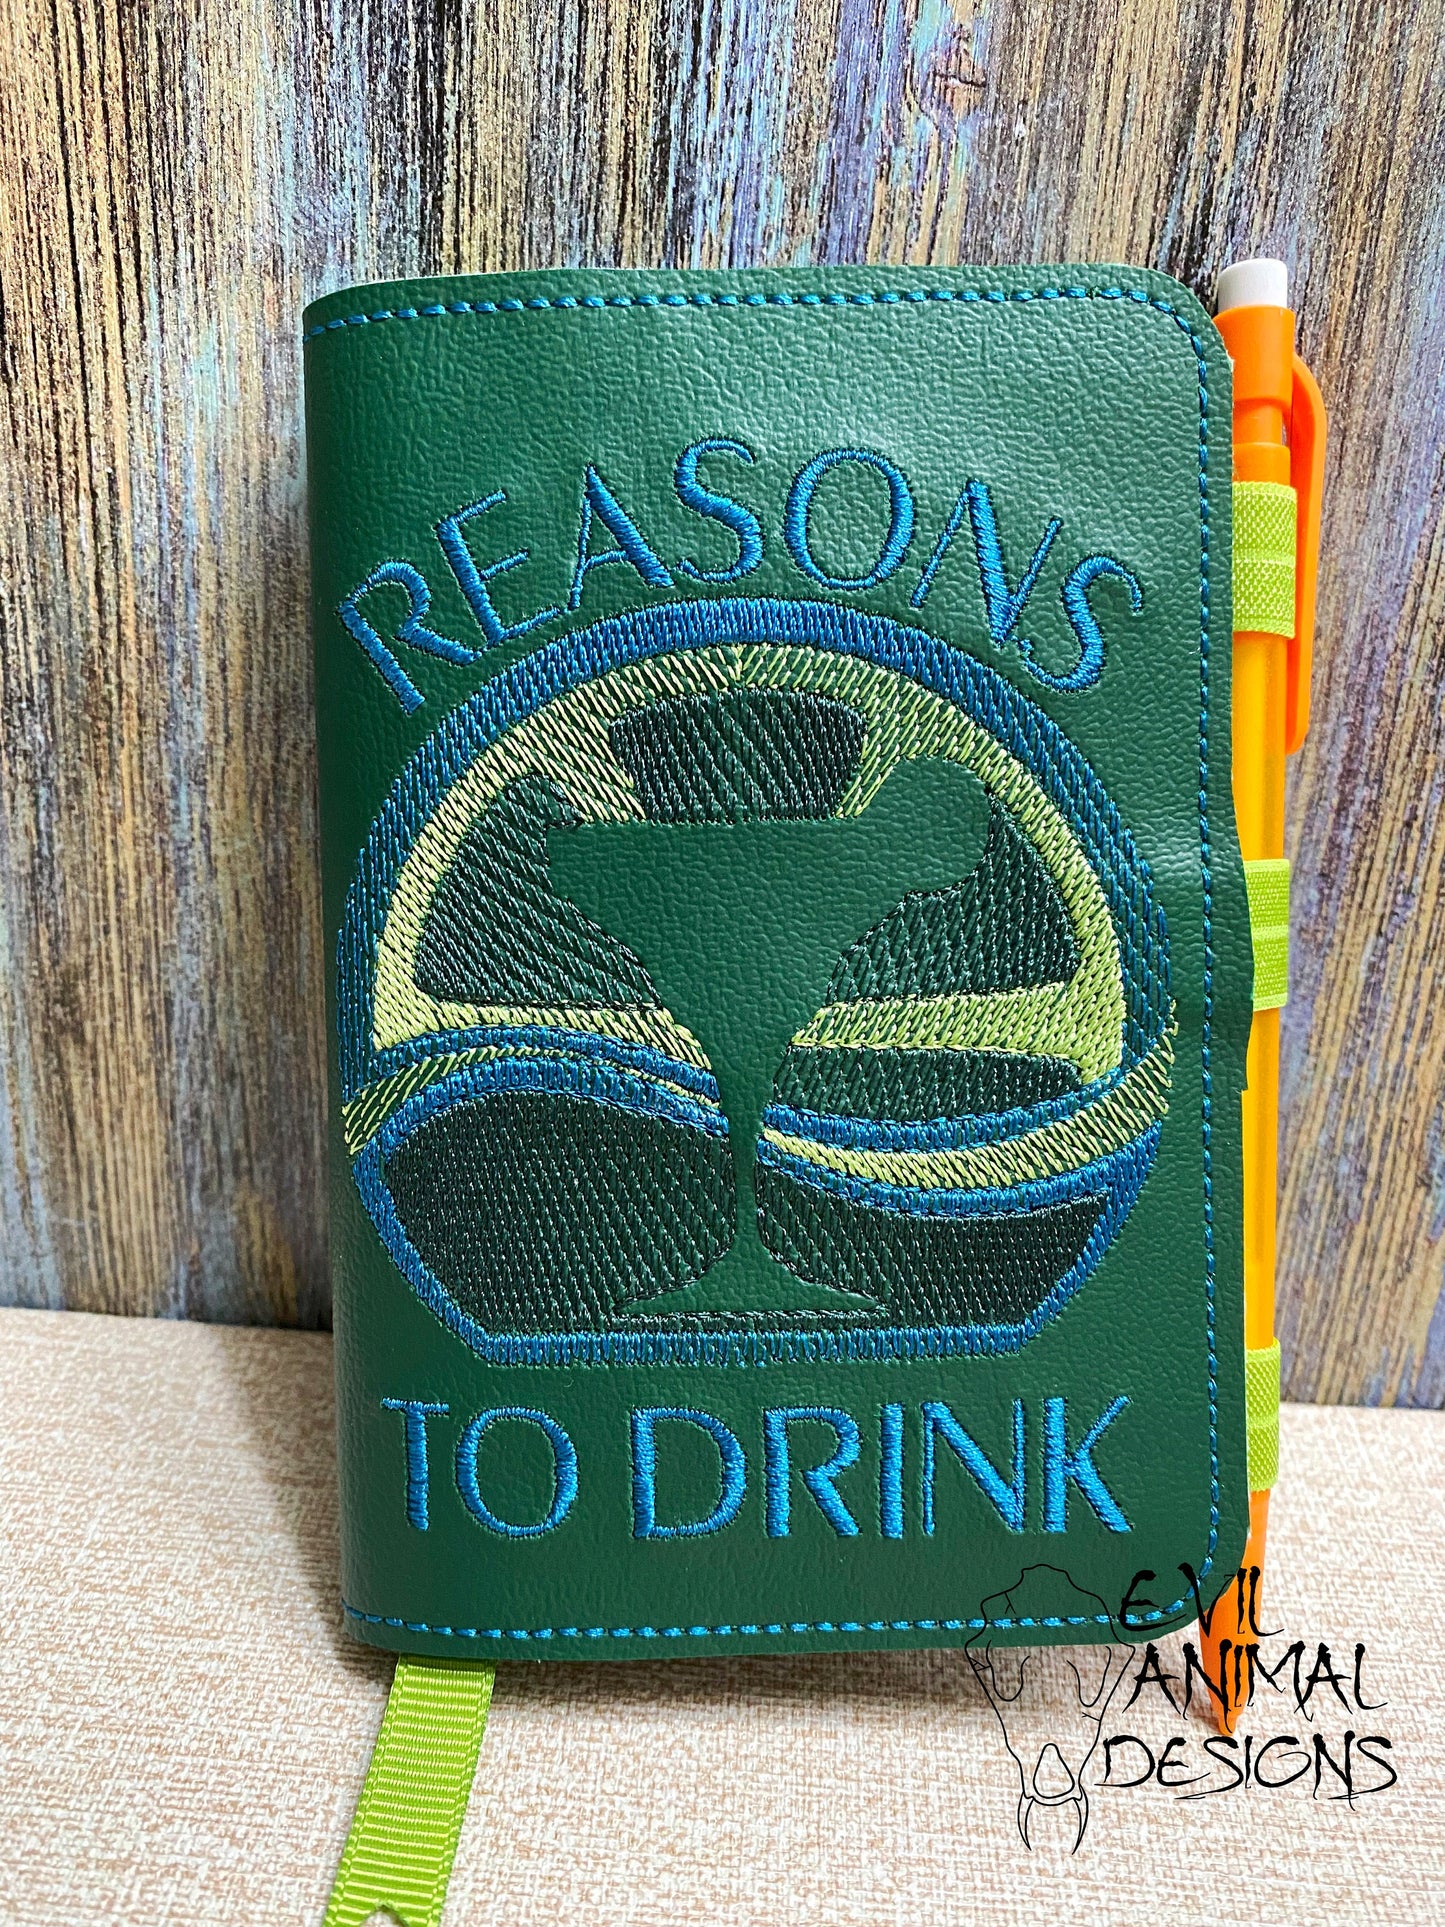 Reasons to Drink Mini Notebook Cover